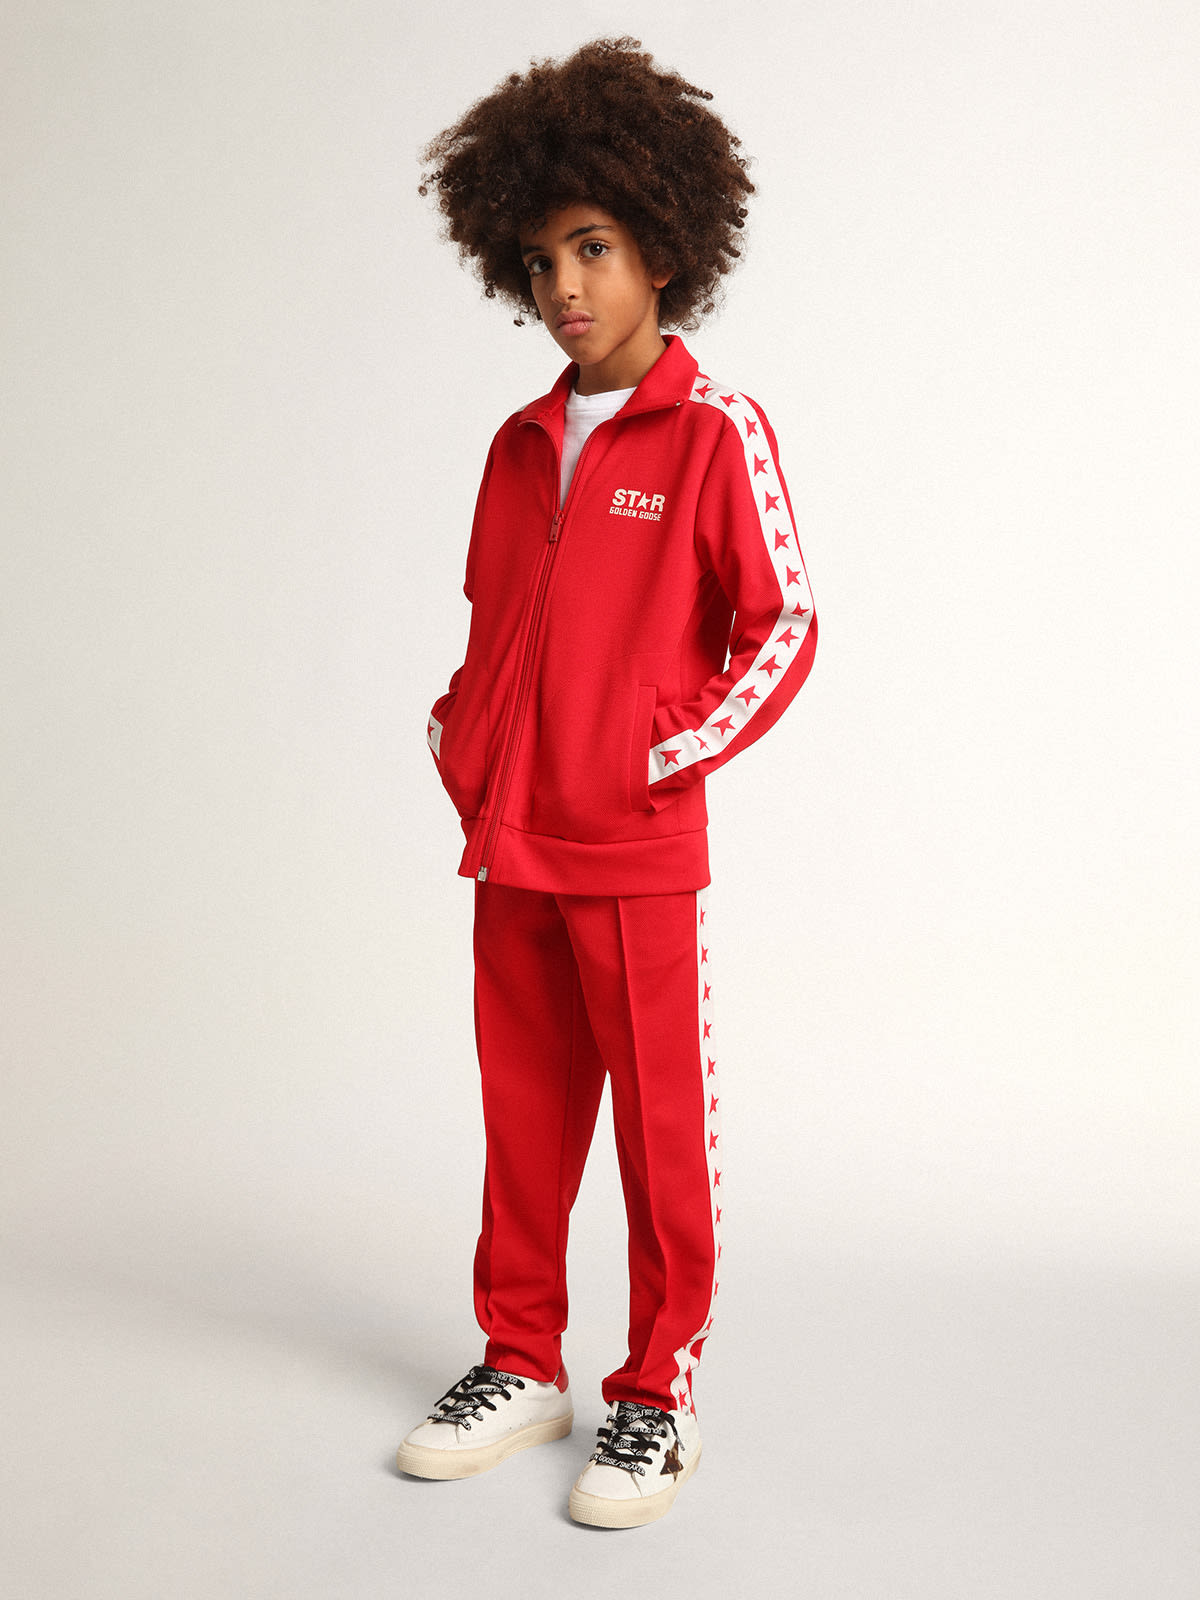 Golden Goose - Red Star Collection jogging pants with white strip and contrasting red stars in 